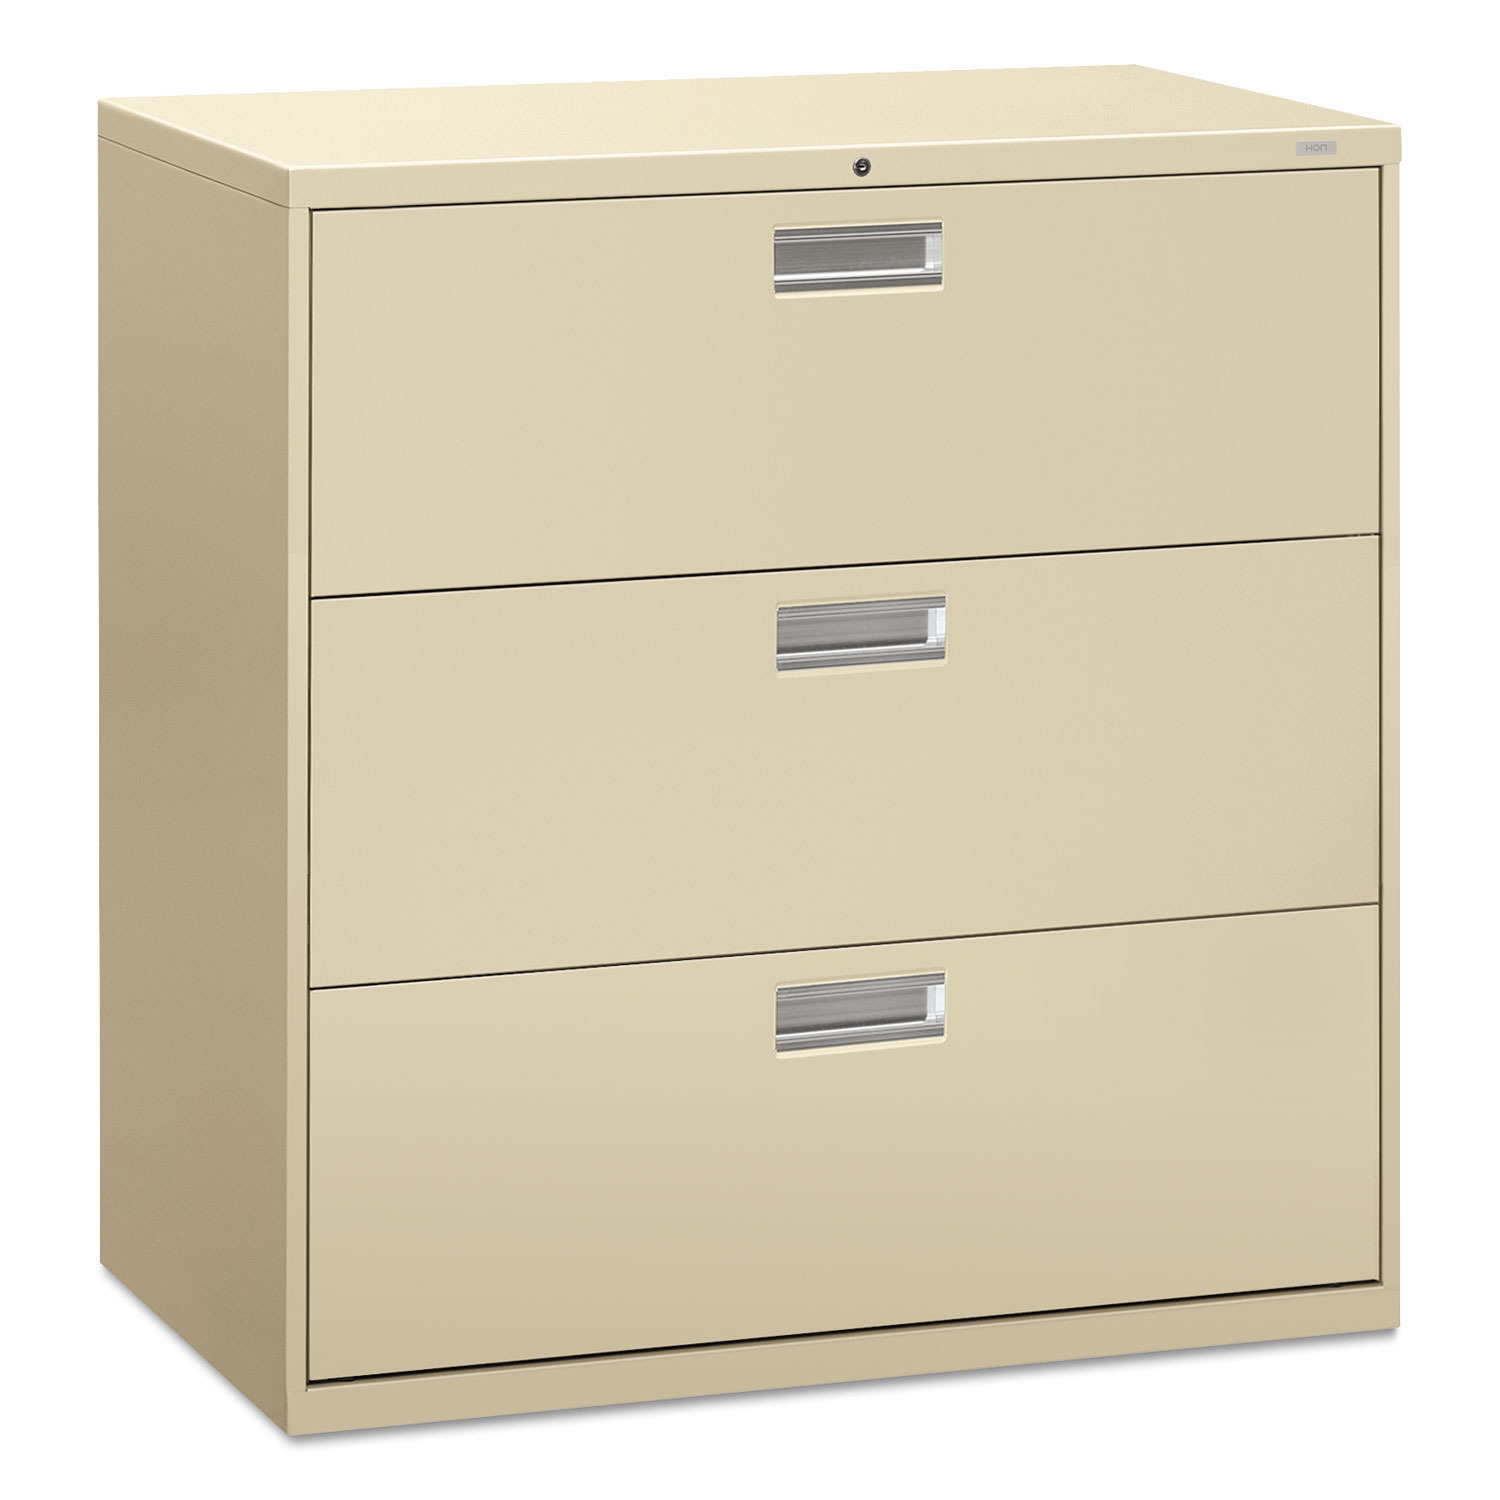 600 Series Three-Drawer Lateral File, 42w x 19-1/4d, Putty